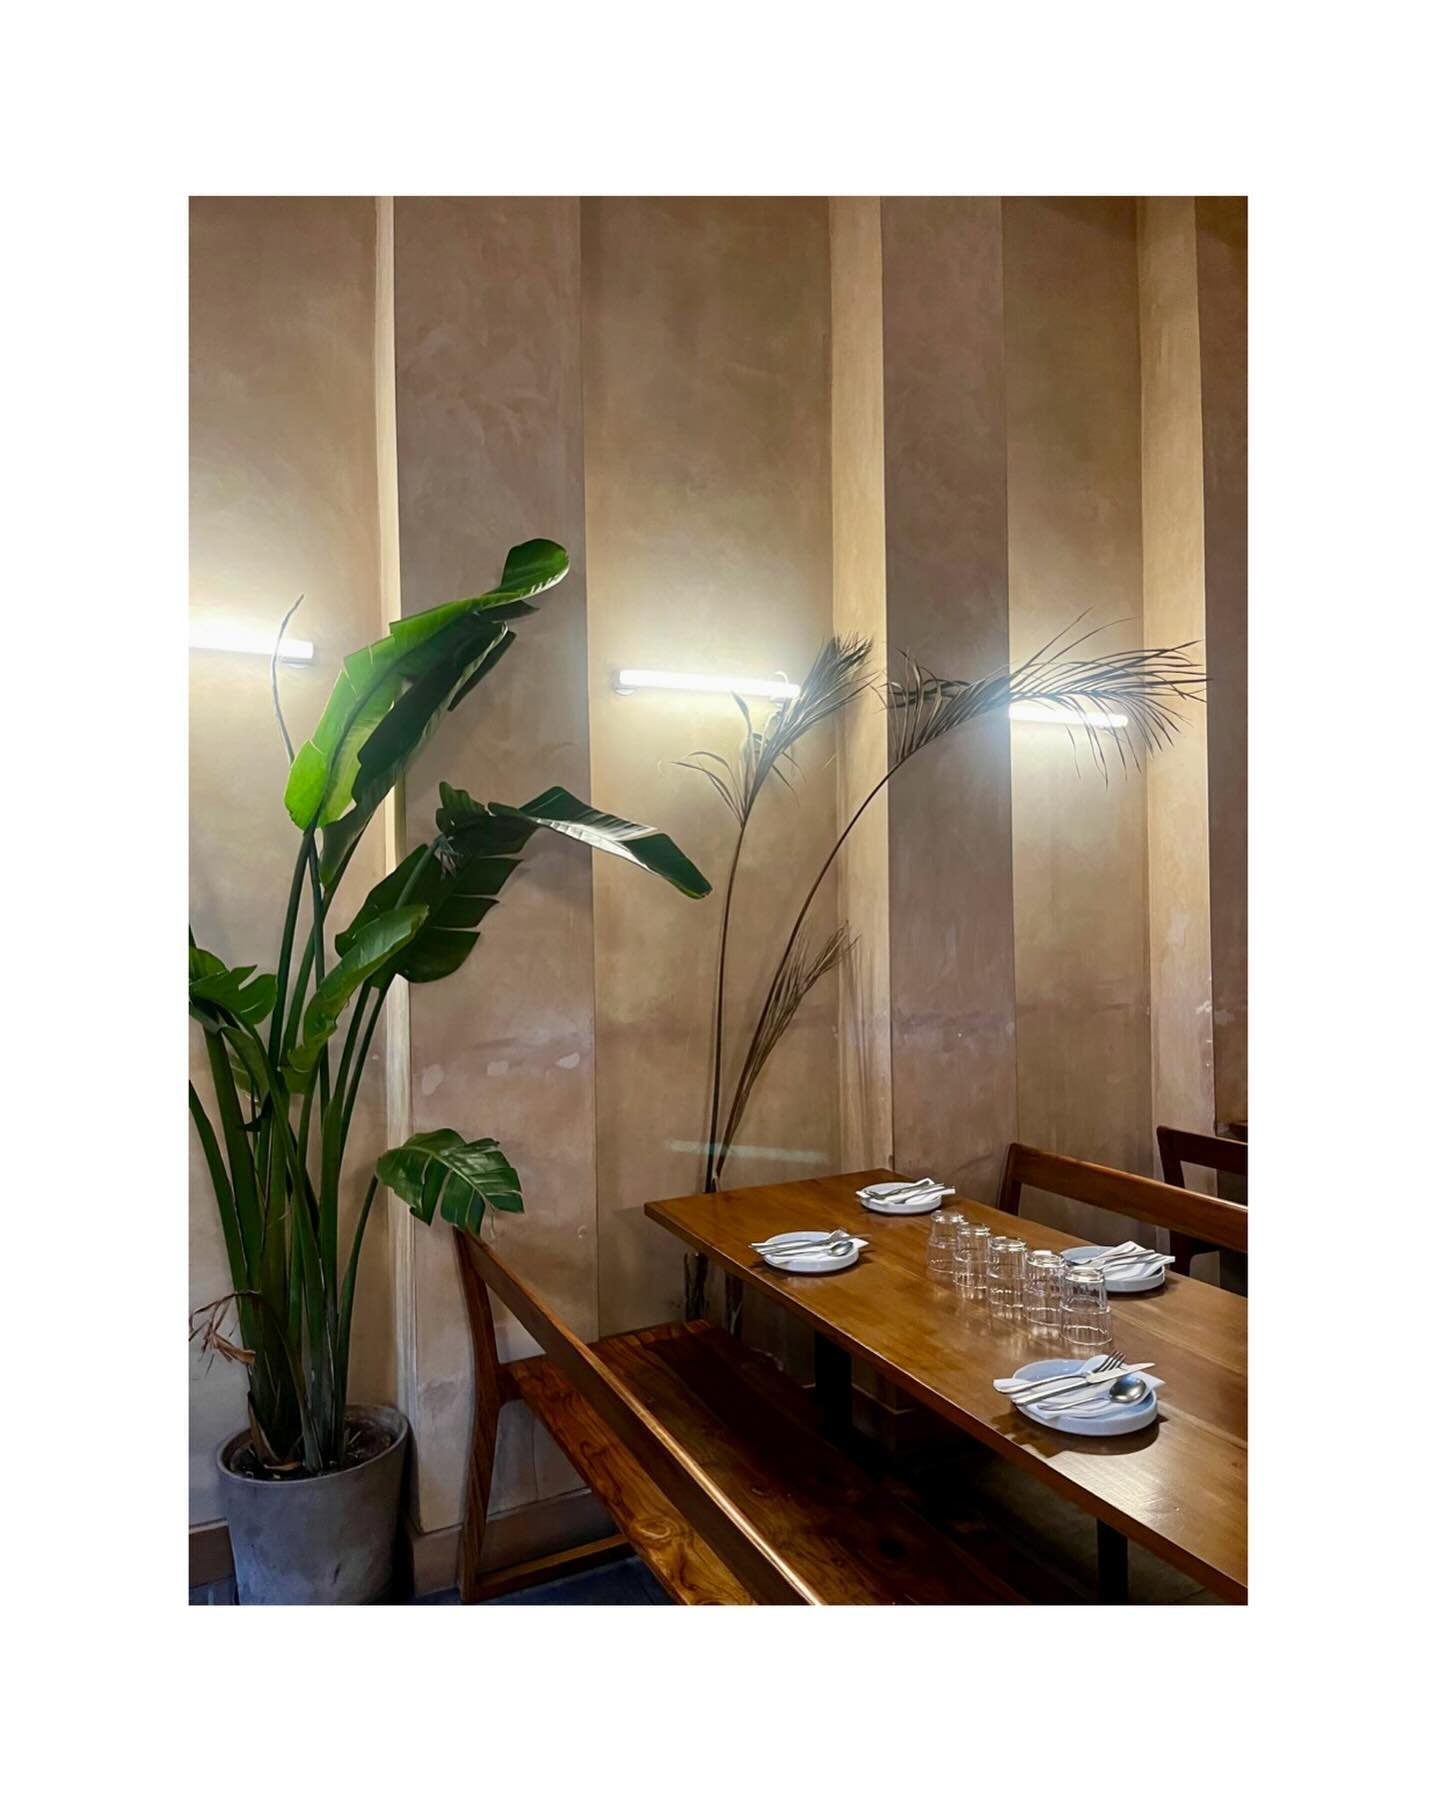 We took some time out to enjoy a delightful meal at Rambutan&hellip; we loved the laid back design of the space with layers of earthy textures that reflect the vivid variety of flavours found in the delicious Sri Lankan food.

#cauldermoore #interior